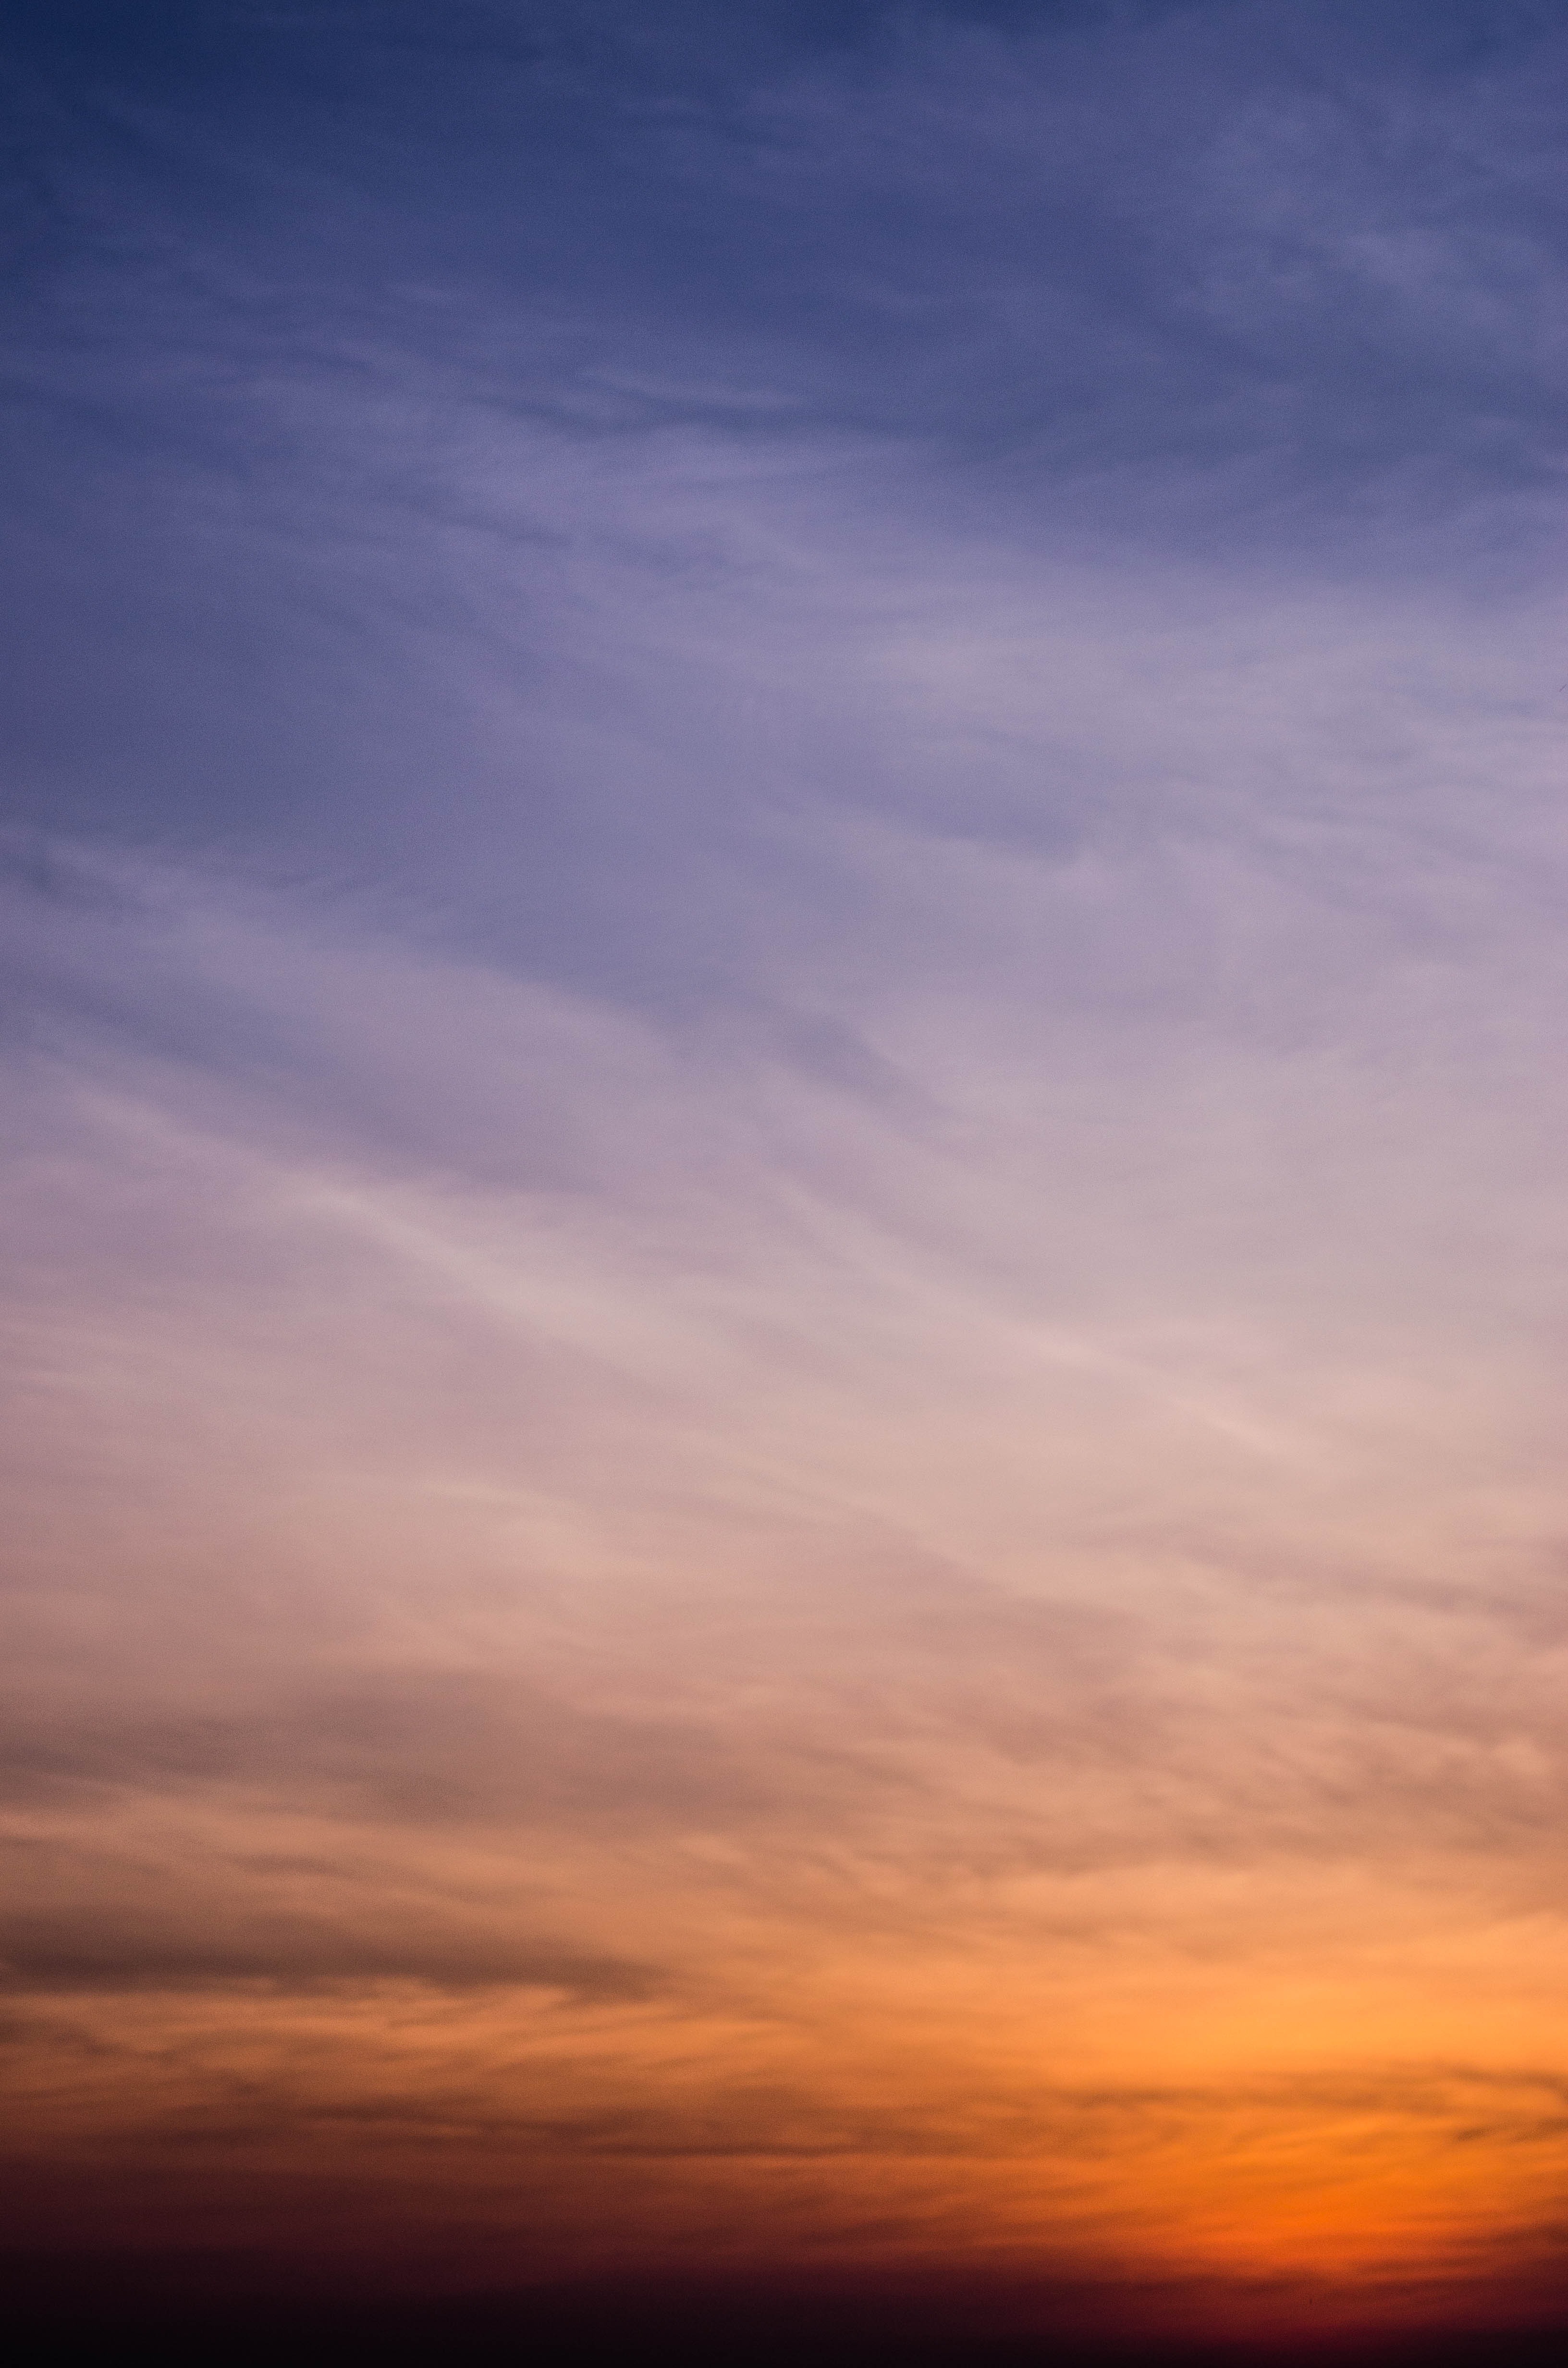 Clouds on the twilight sky free image download